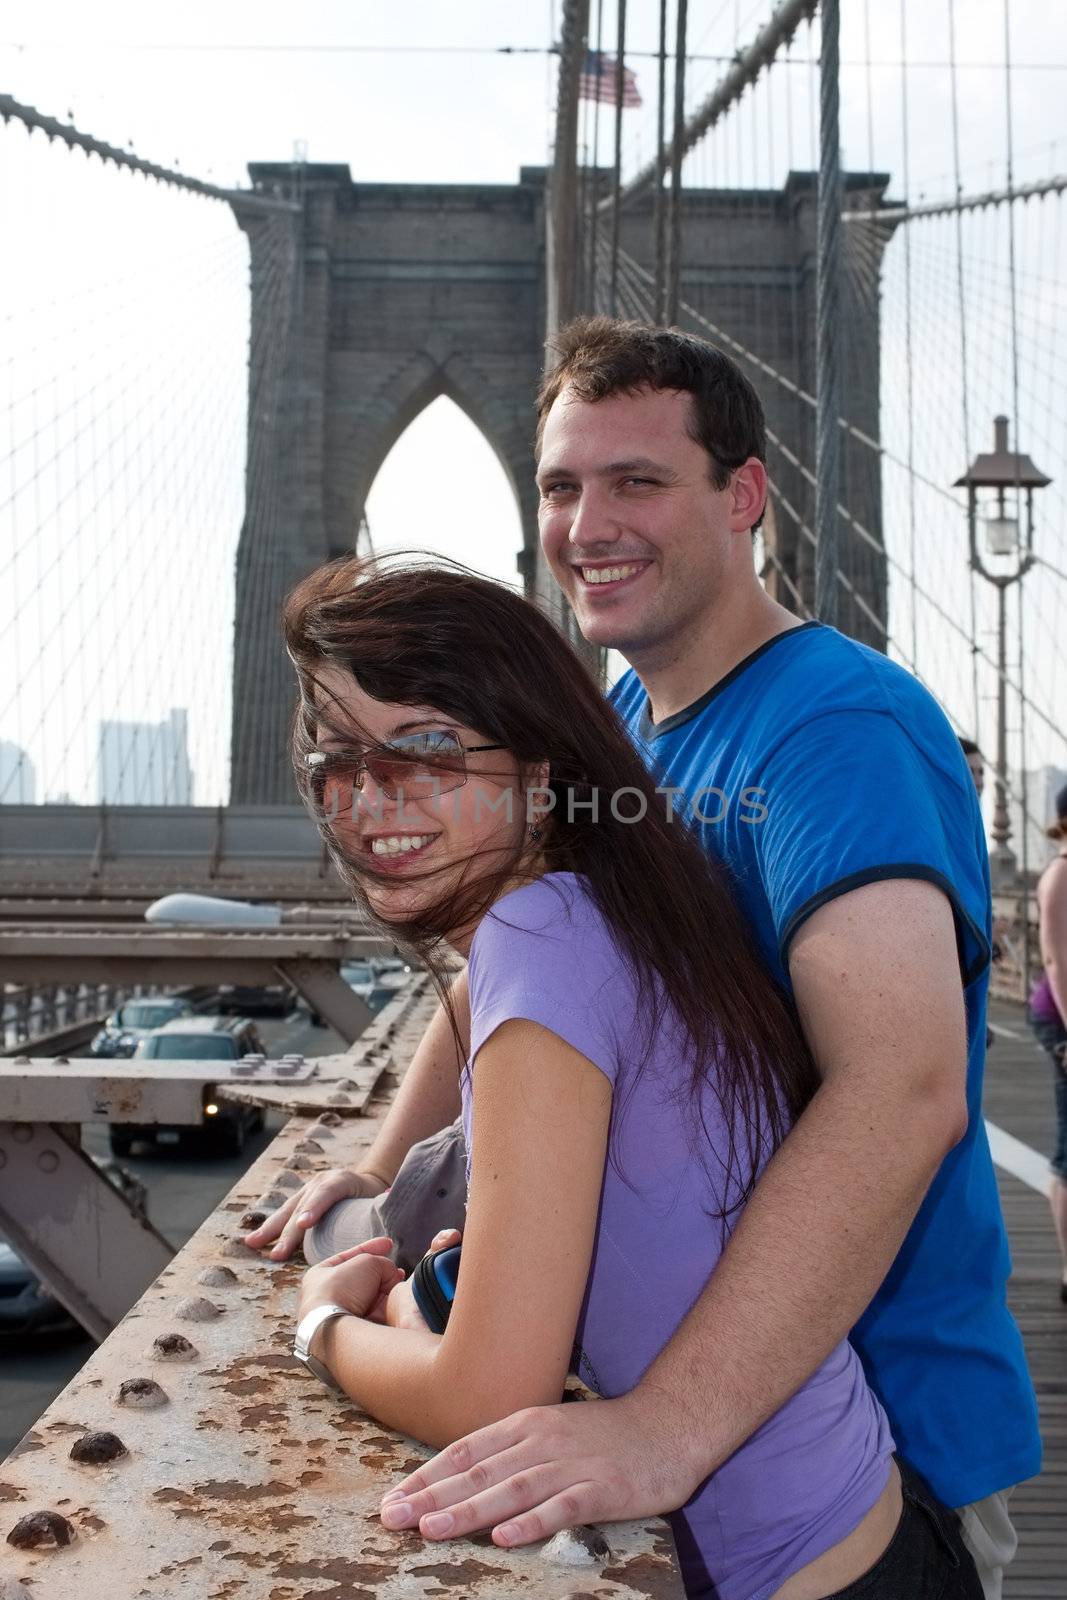 A smiling couple of tourists visit Brooklyn New York by the world famous Brooklyn Bridge.